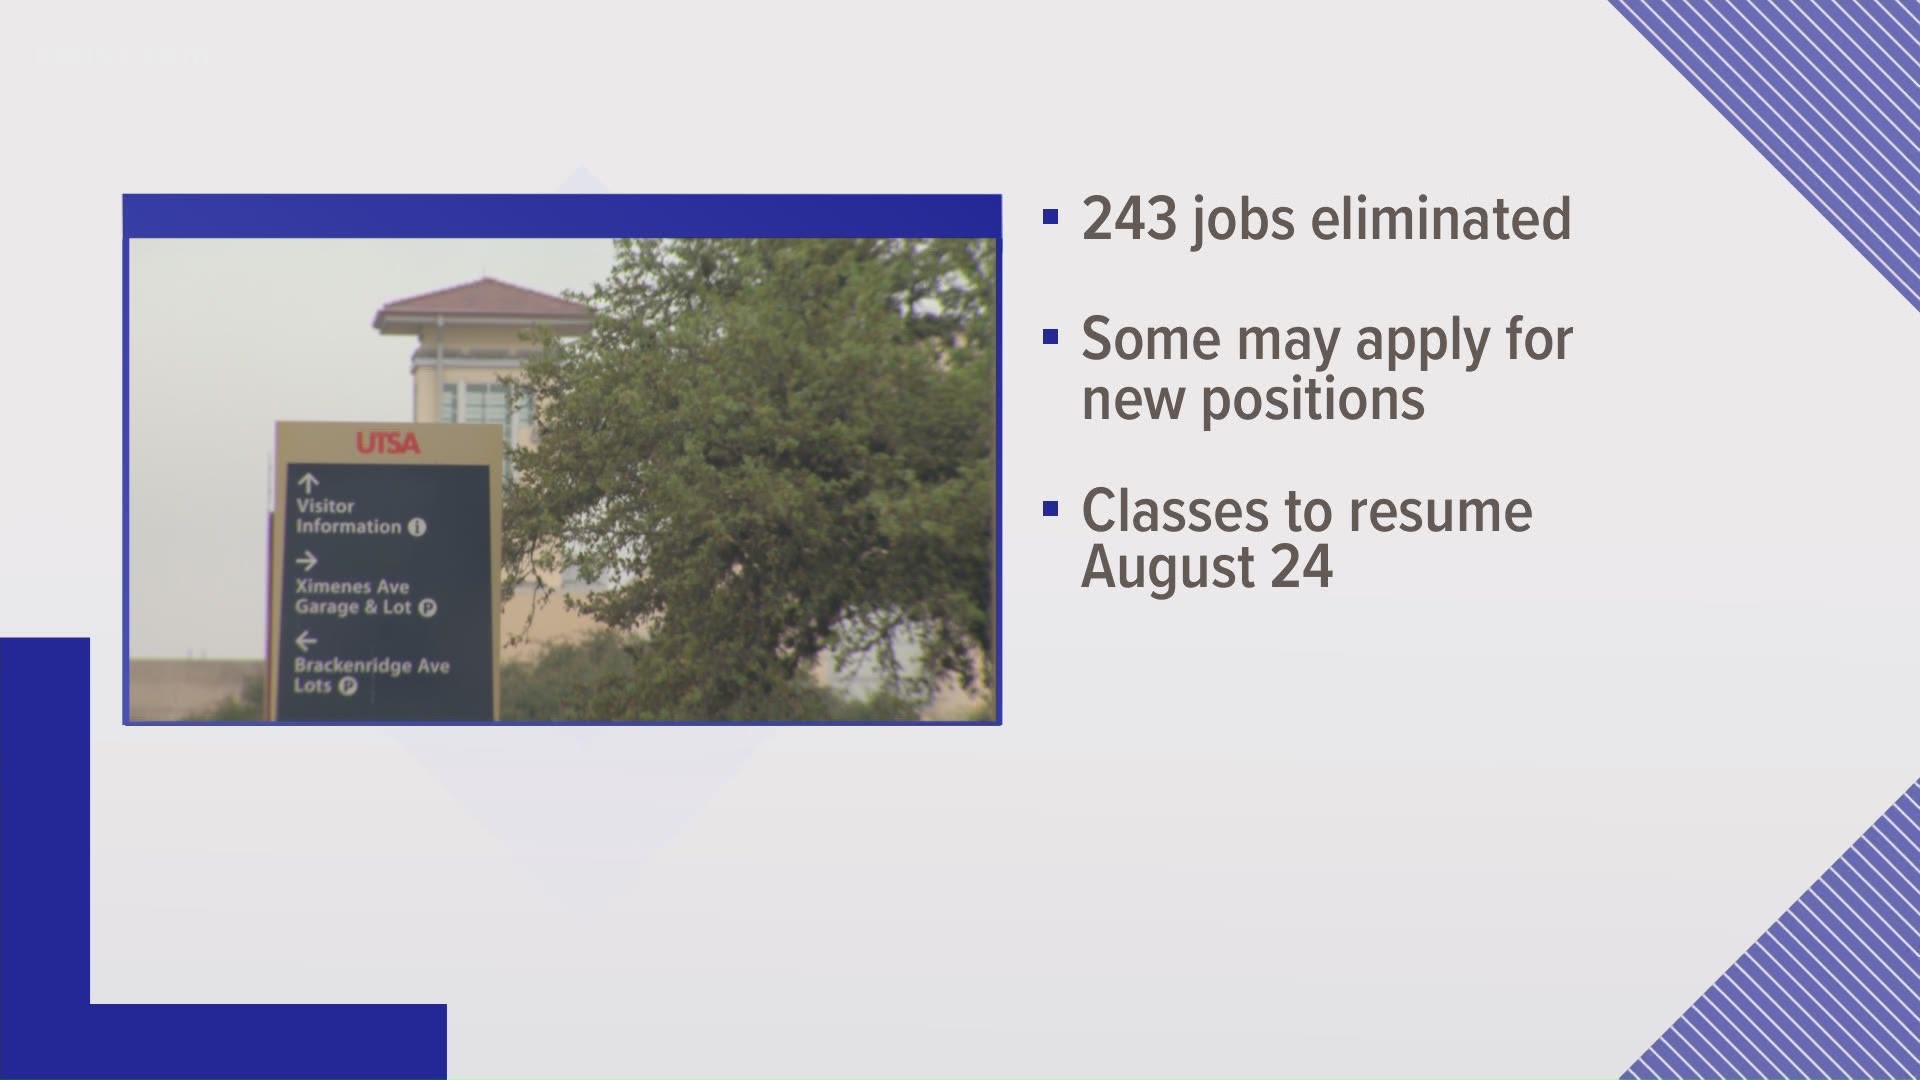 The university says 243 positions are being eliminated.